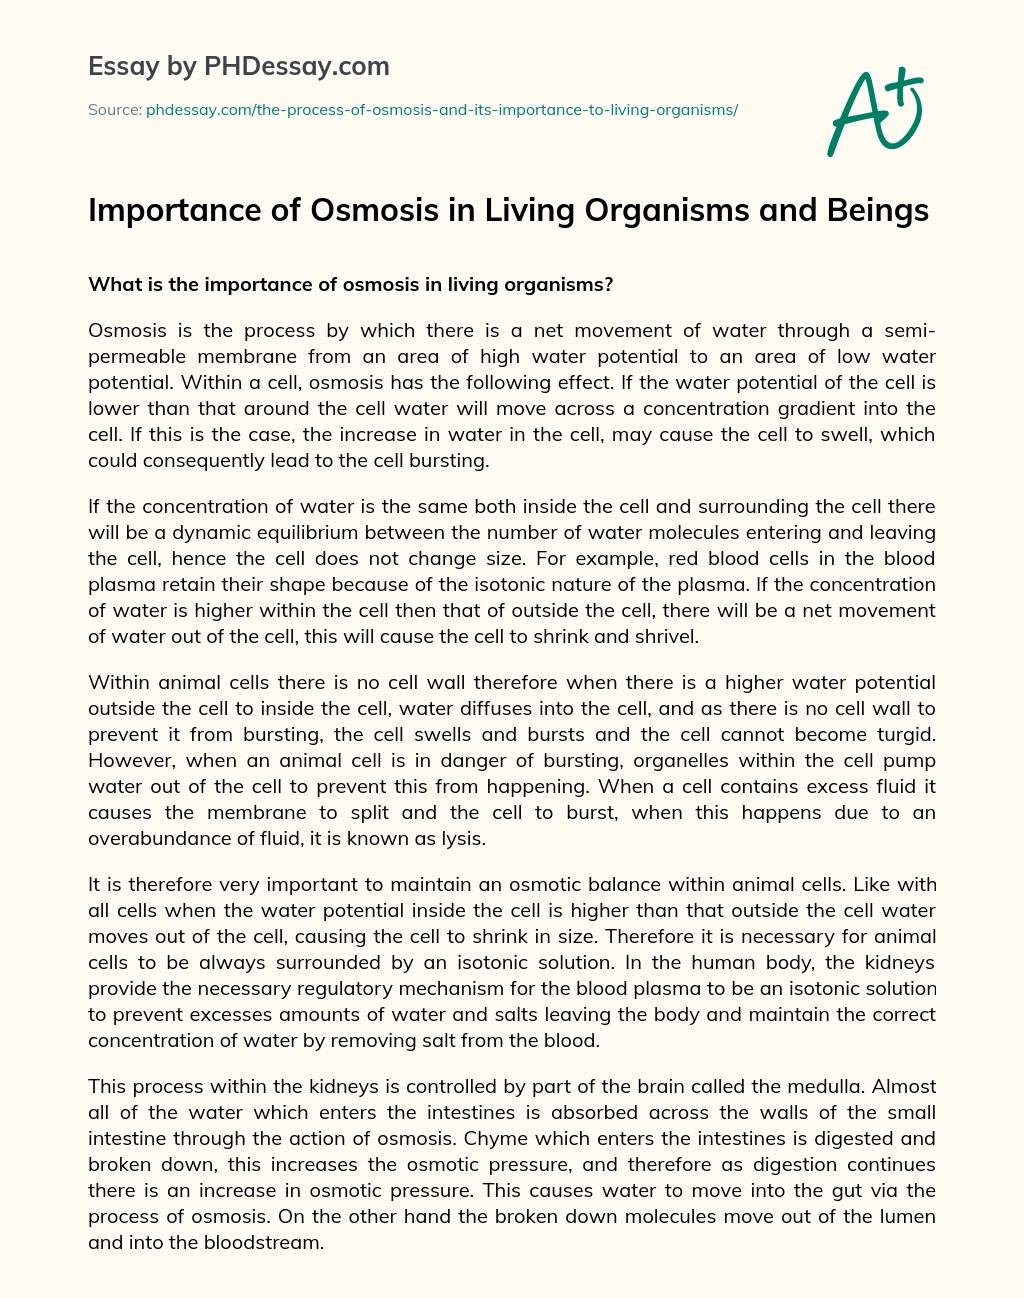 osmosis in living organisms